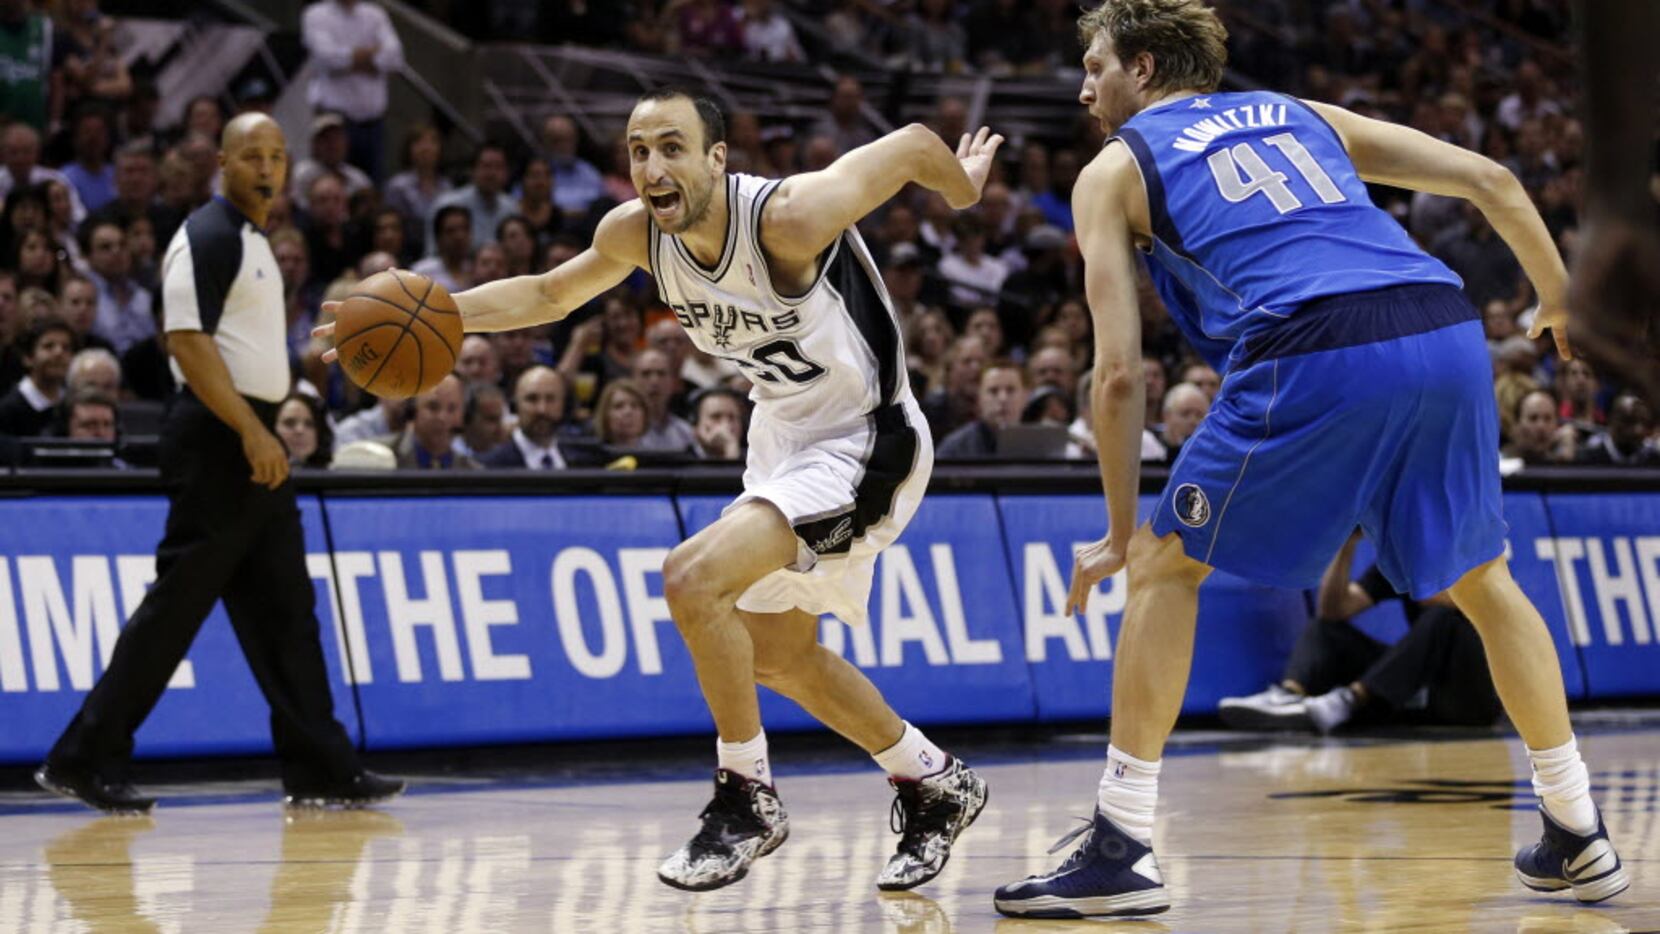 Manu Ginobili Announces Retirement from NBA After 16 Seasons with